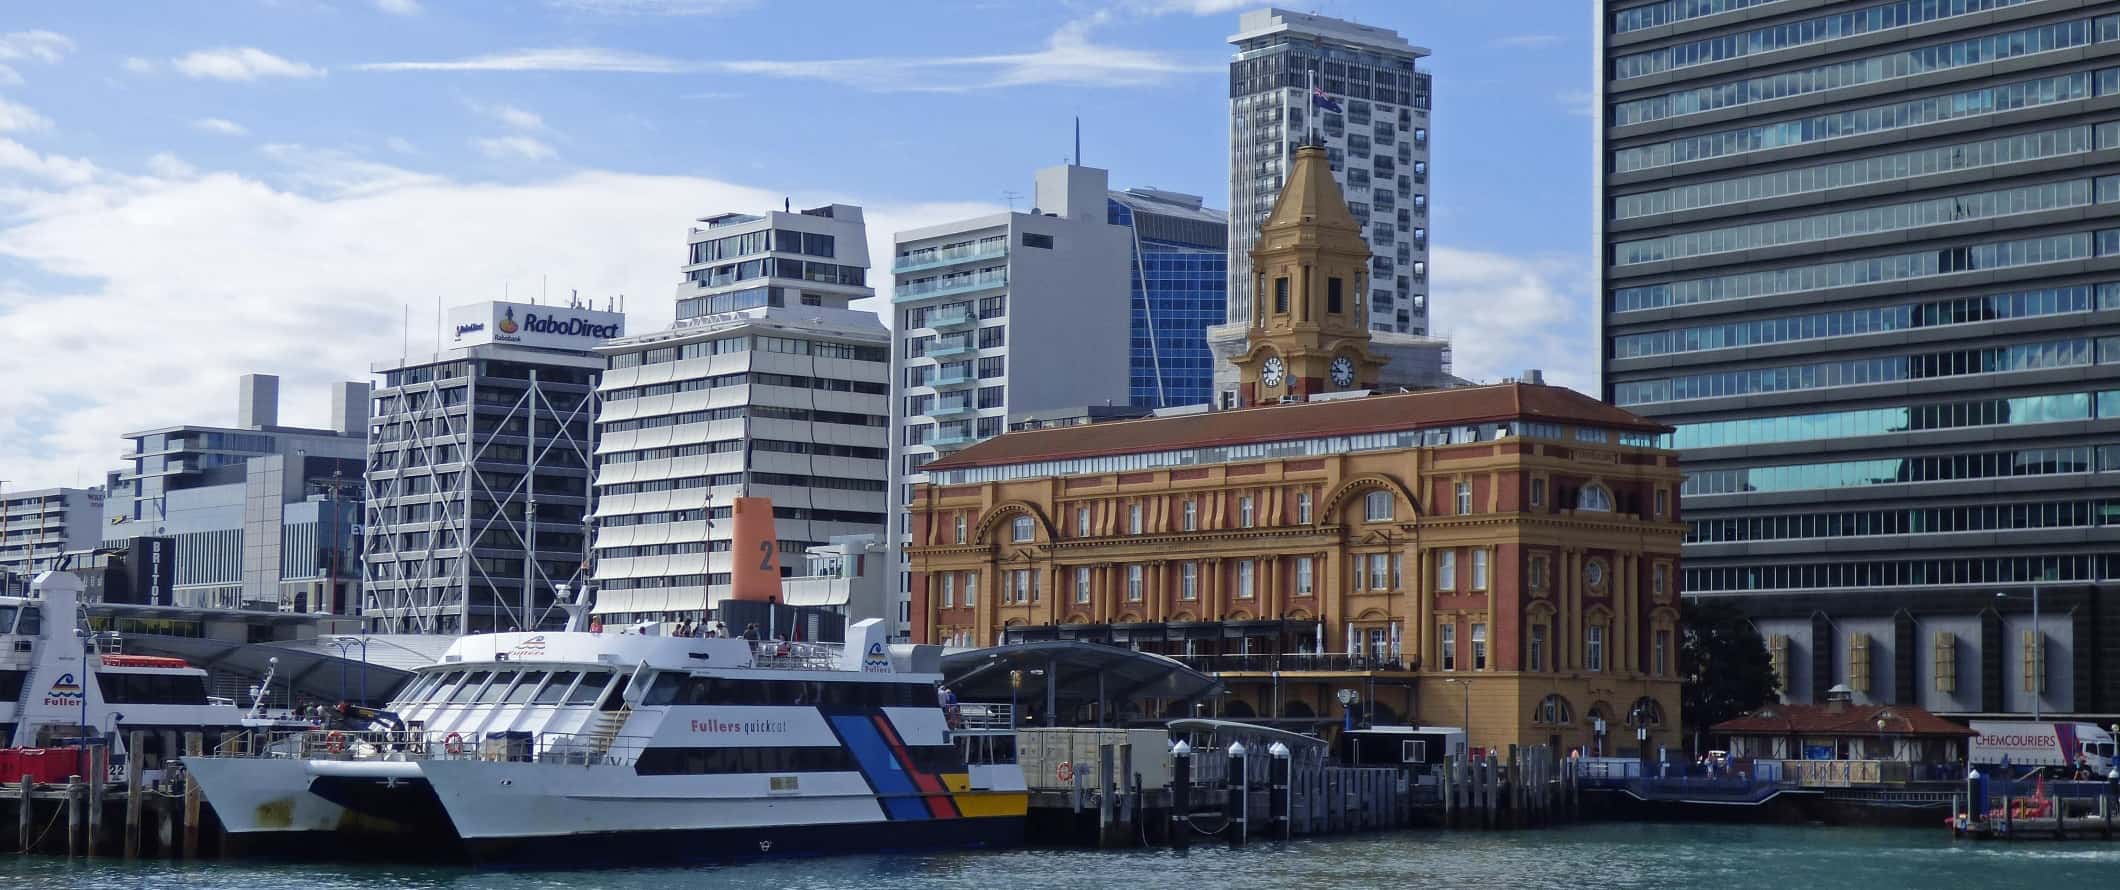 Harborfront with ferry, historic building, and tall skyscrapers in the background in Auckland, New Zealand.